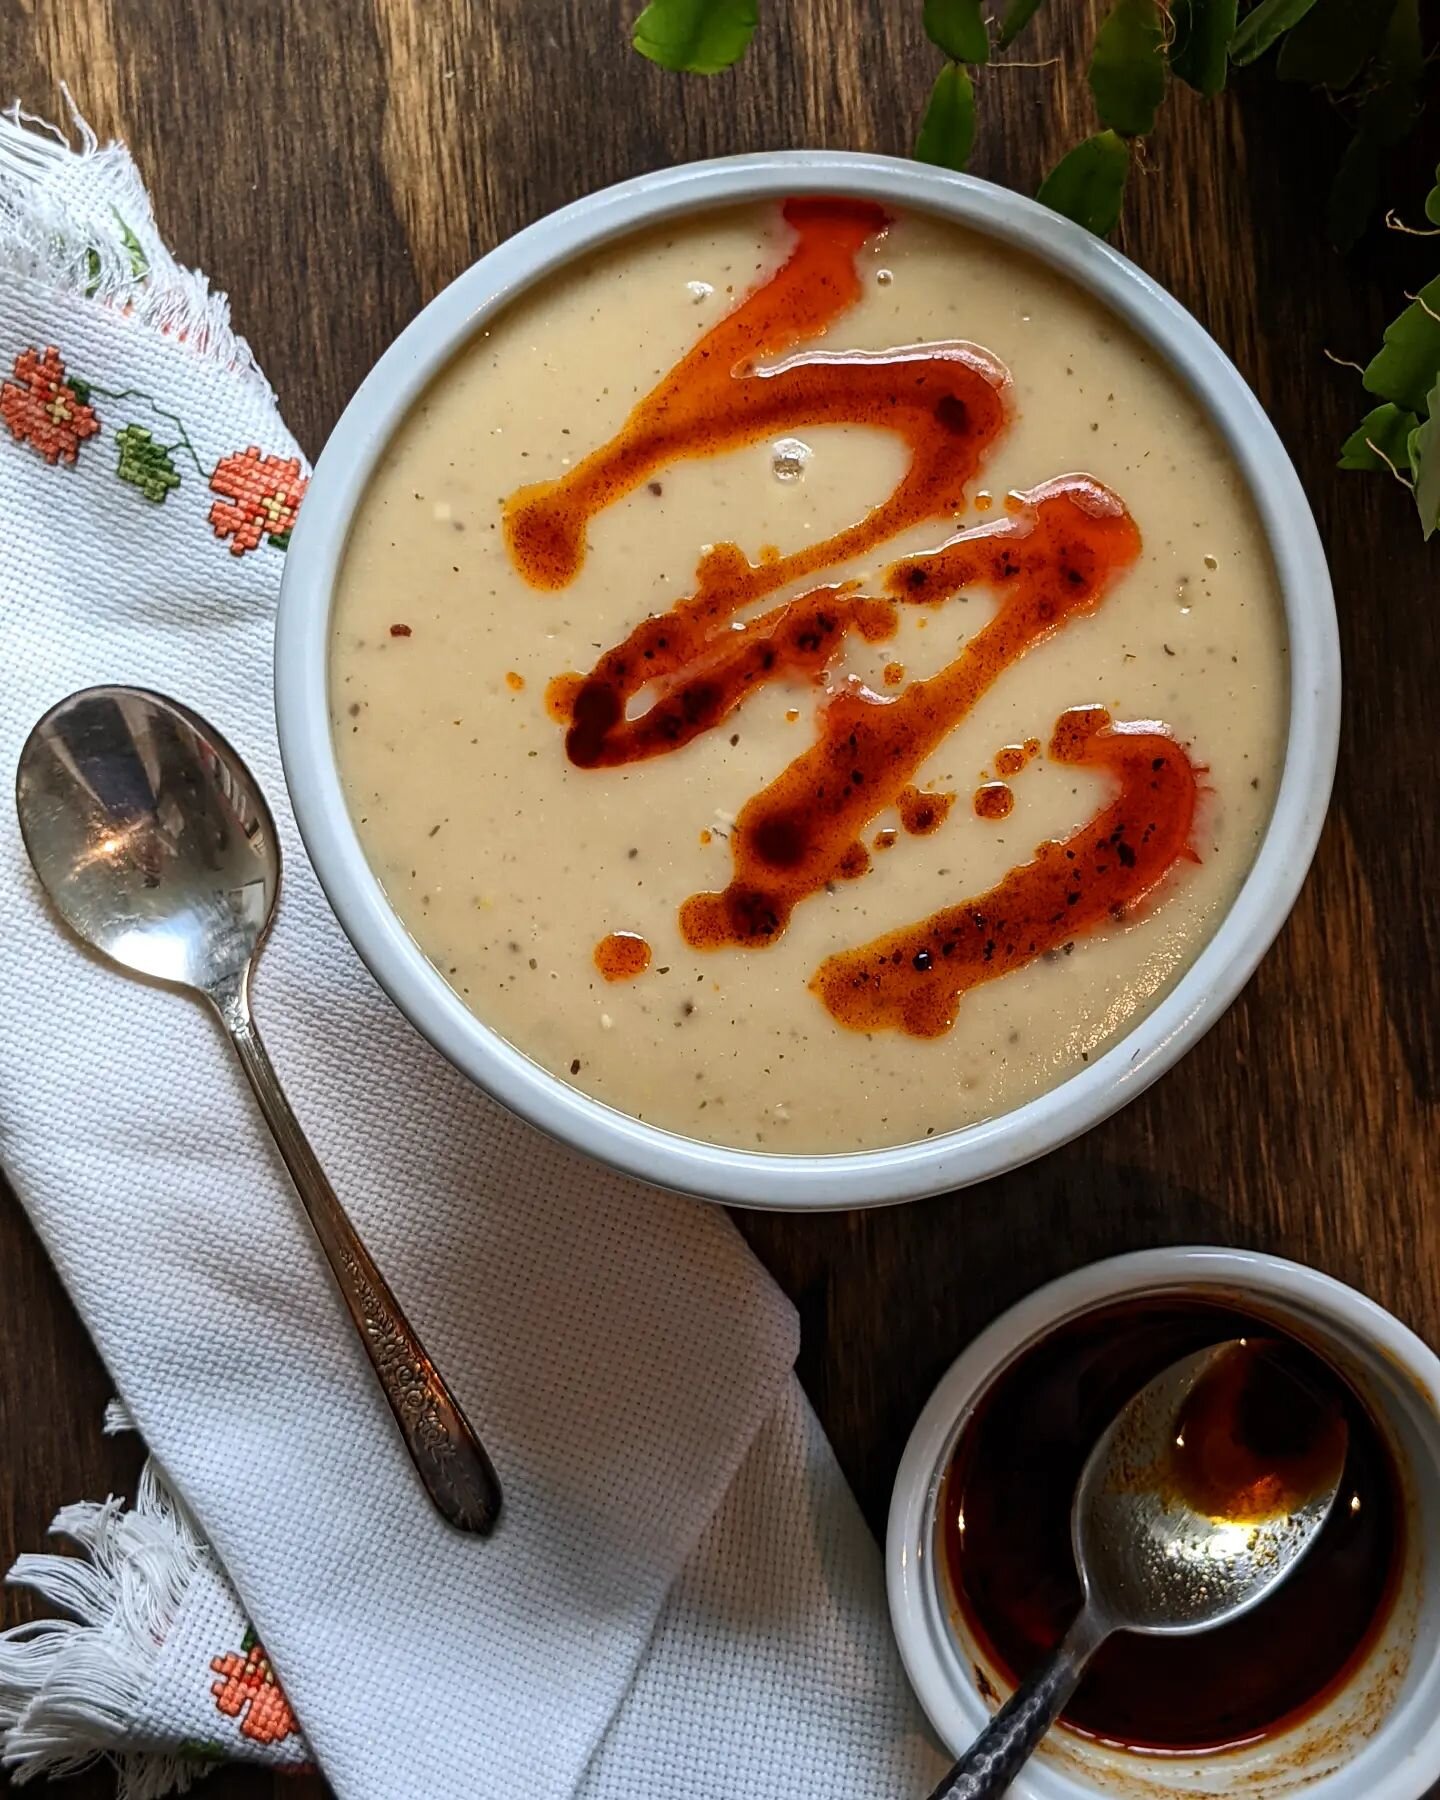 ~ Impossibly Creamy Cauliflower, Potato and White Bean Soup with Urfa Biber, Smoked Paprika Oil~ 
🥔
The recipe for this beauty went out to my mailing list this week! Are you on my list? Head to cutsandburns.com and scroll to the bottom to sign up fo